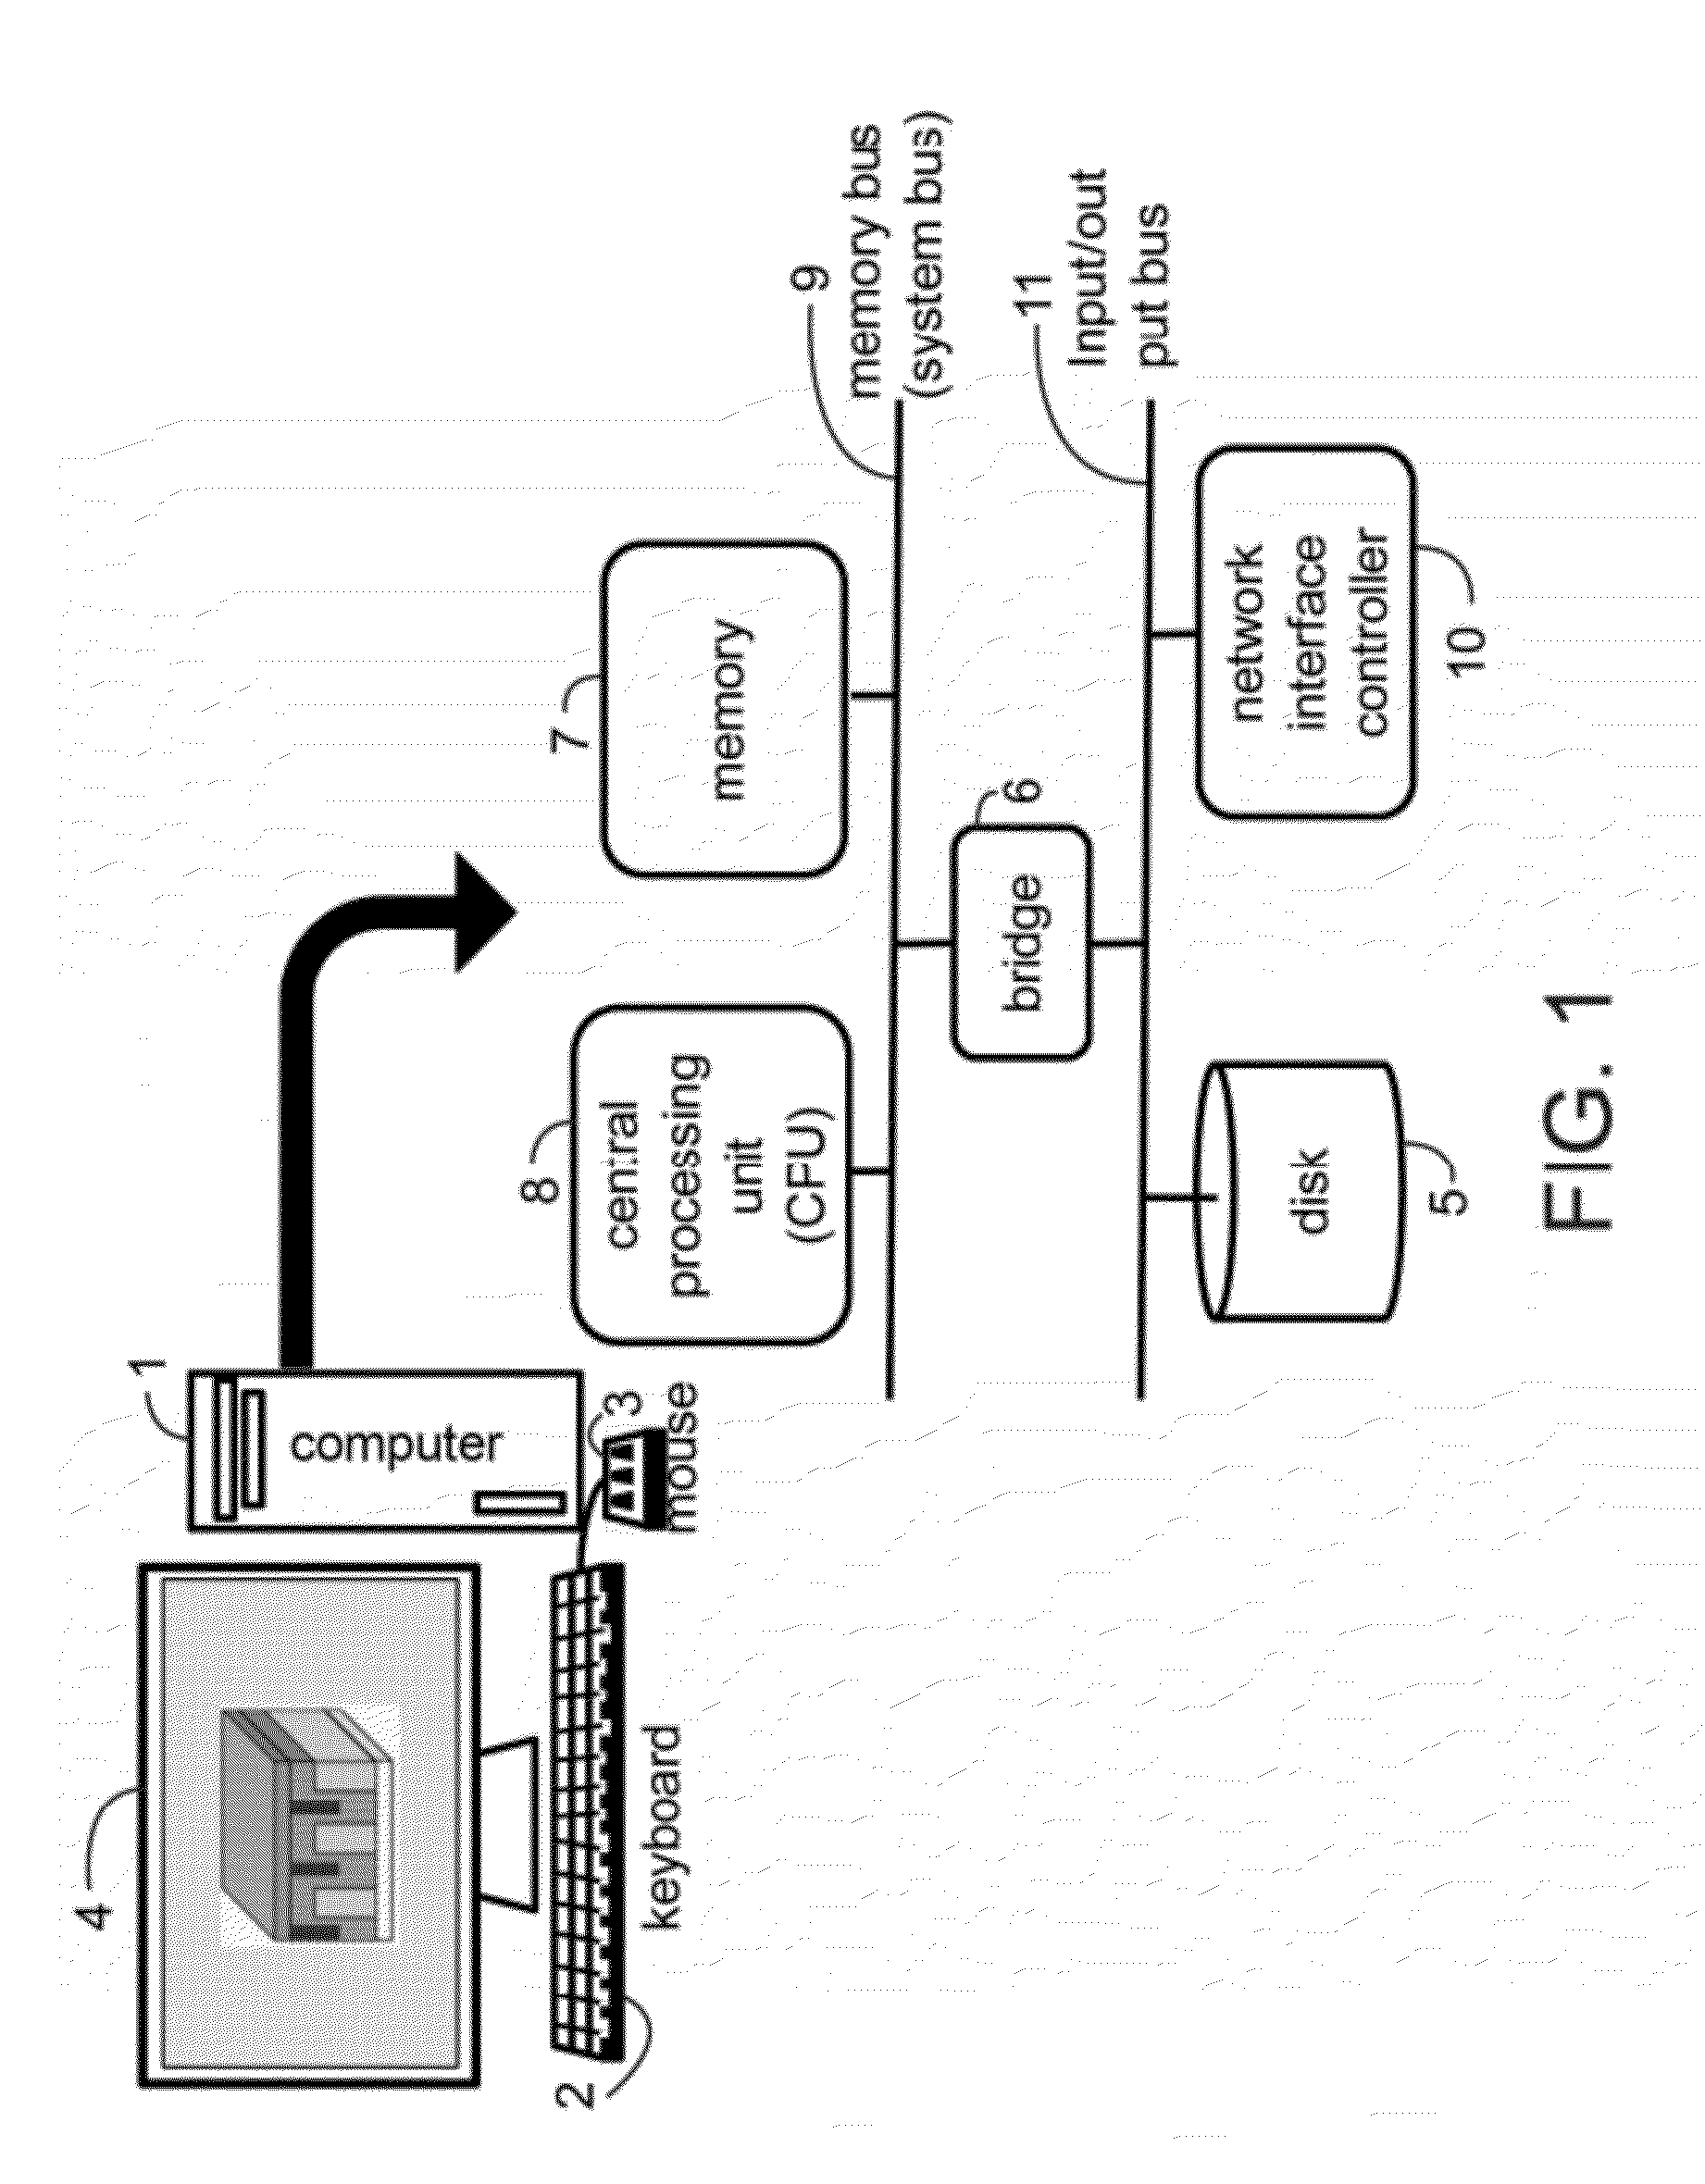 Computer aided solid state battery design method and manufacture of same using selected combinations of characteristics